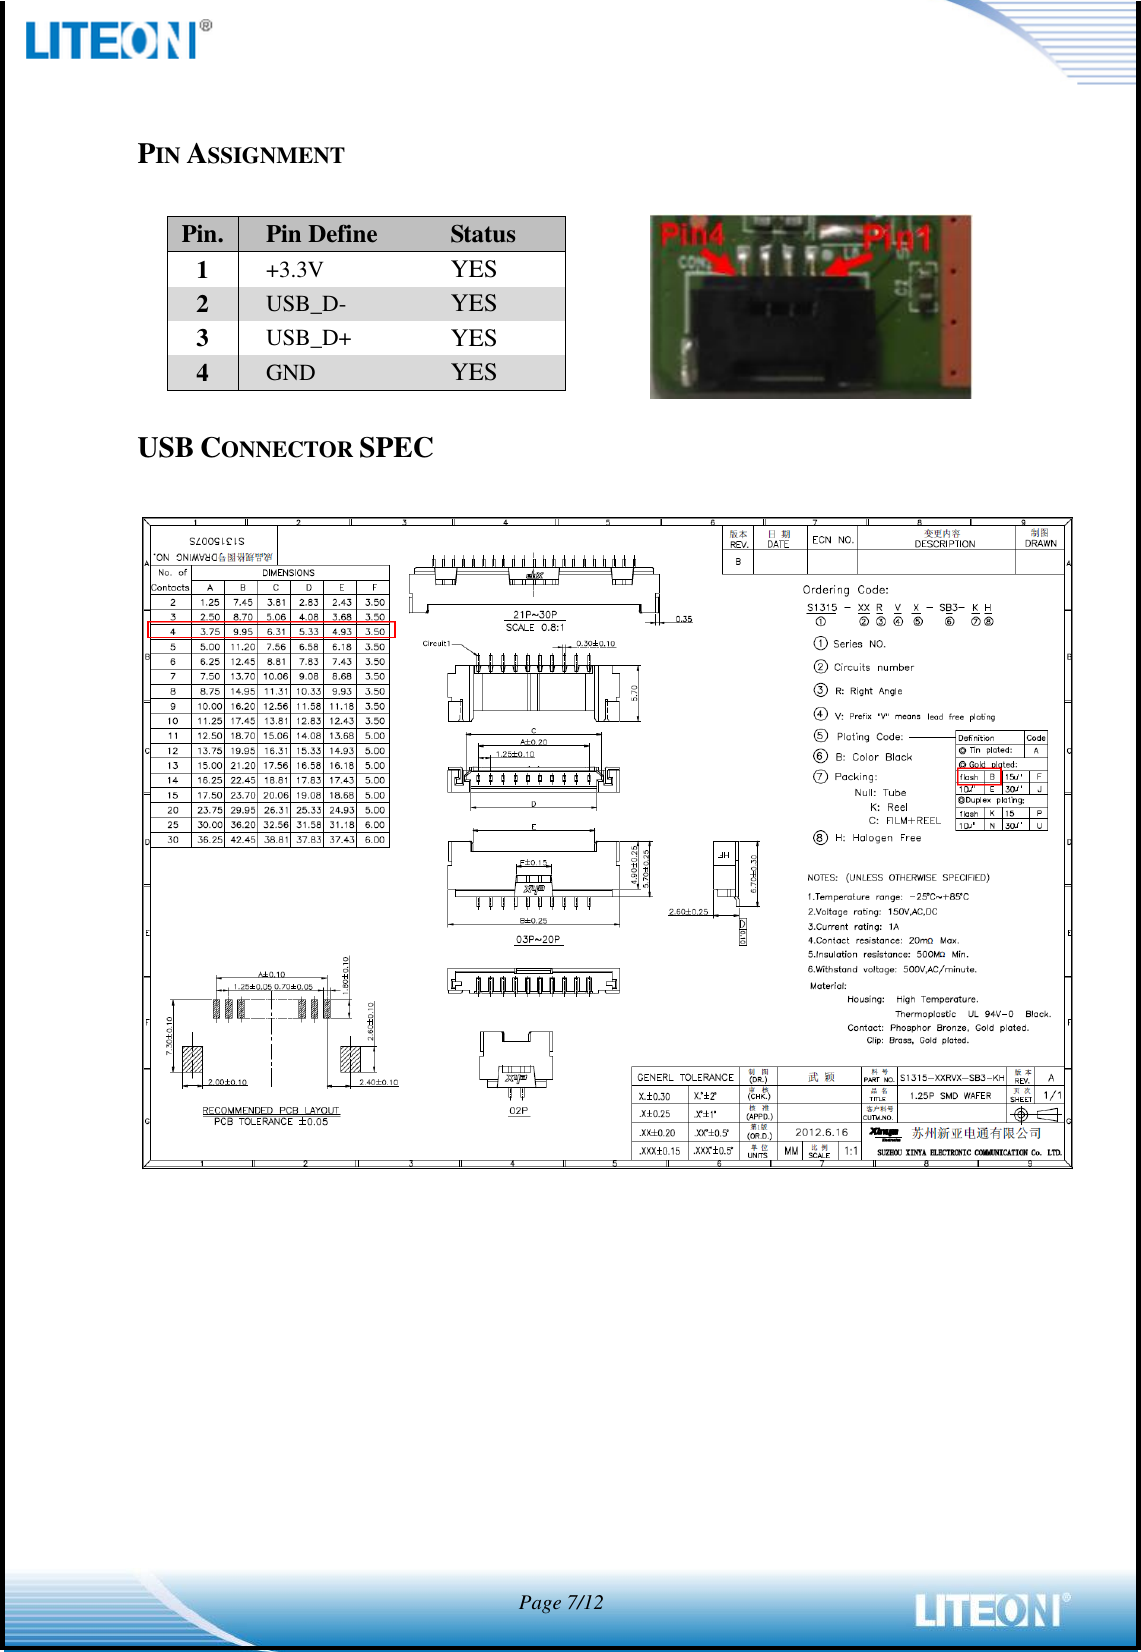            Page 7/12   PIN ASSIGNMENT    USB CONNECTOR SPEC    Pin. Pin Define Status 1 +3.3V YES 2 USB_D- YES 3 USB_D+ YES 4 GND YES 